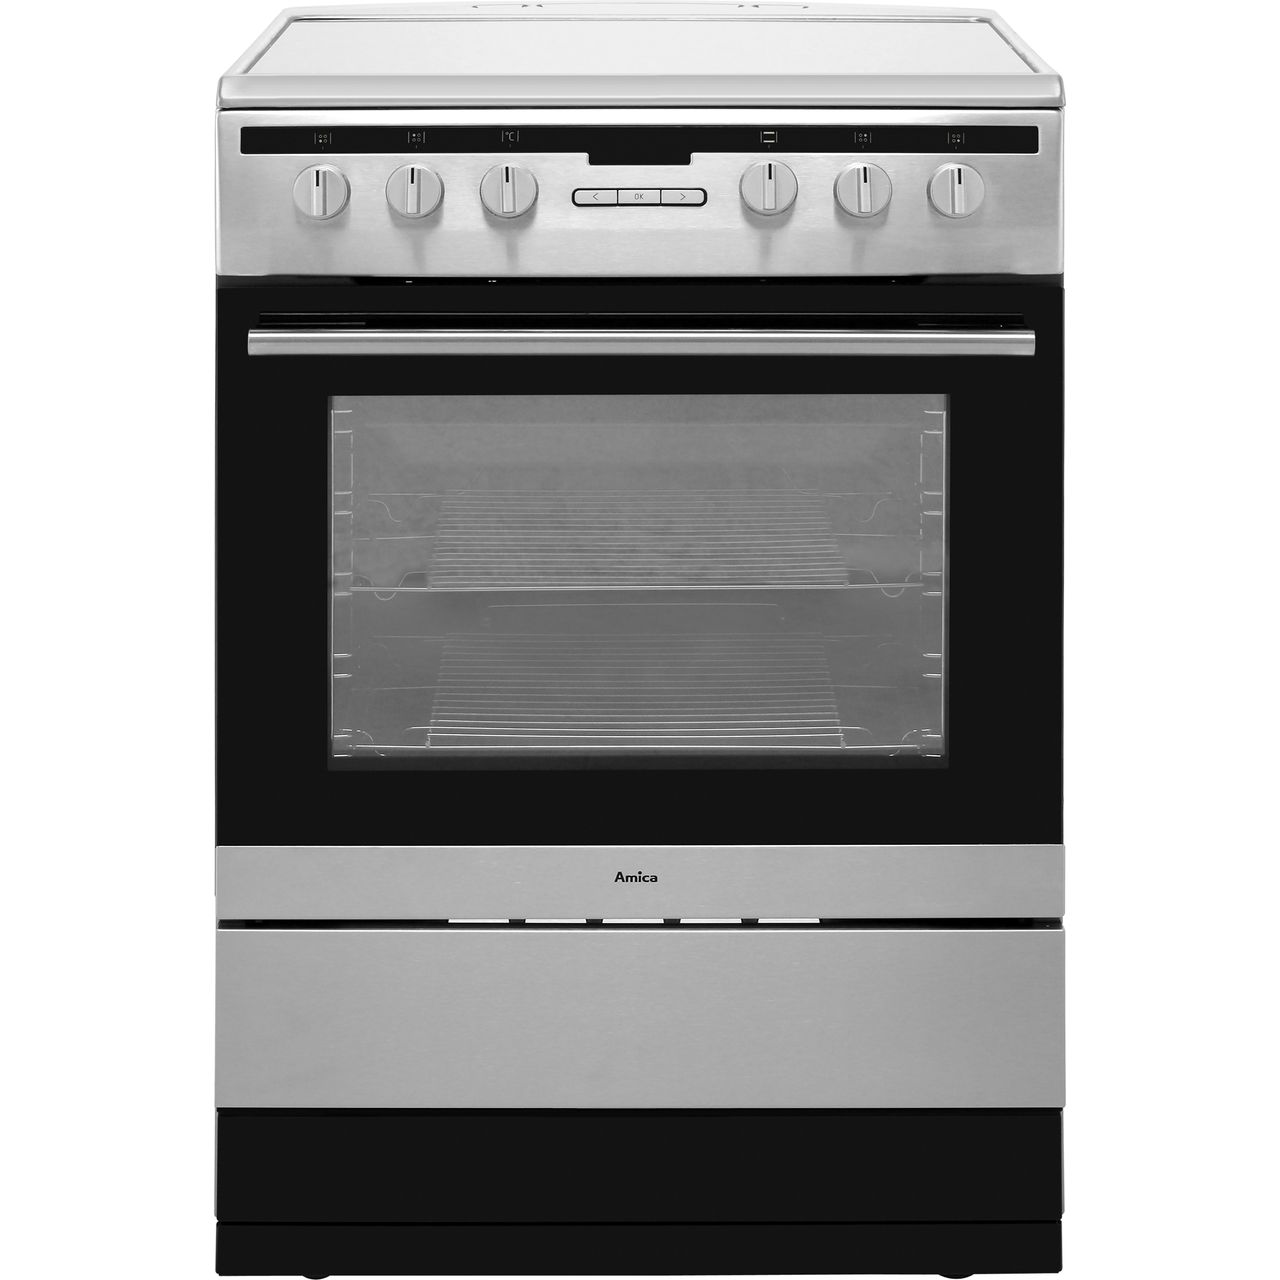 Amica 608CE2TAXX 60cm Electric Cooker with Ceramic Hob Review